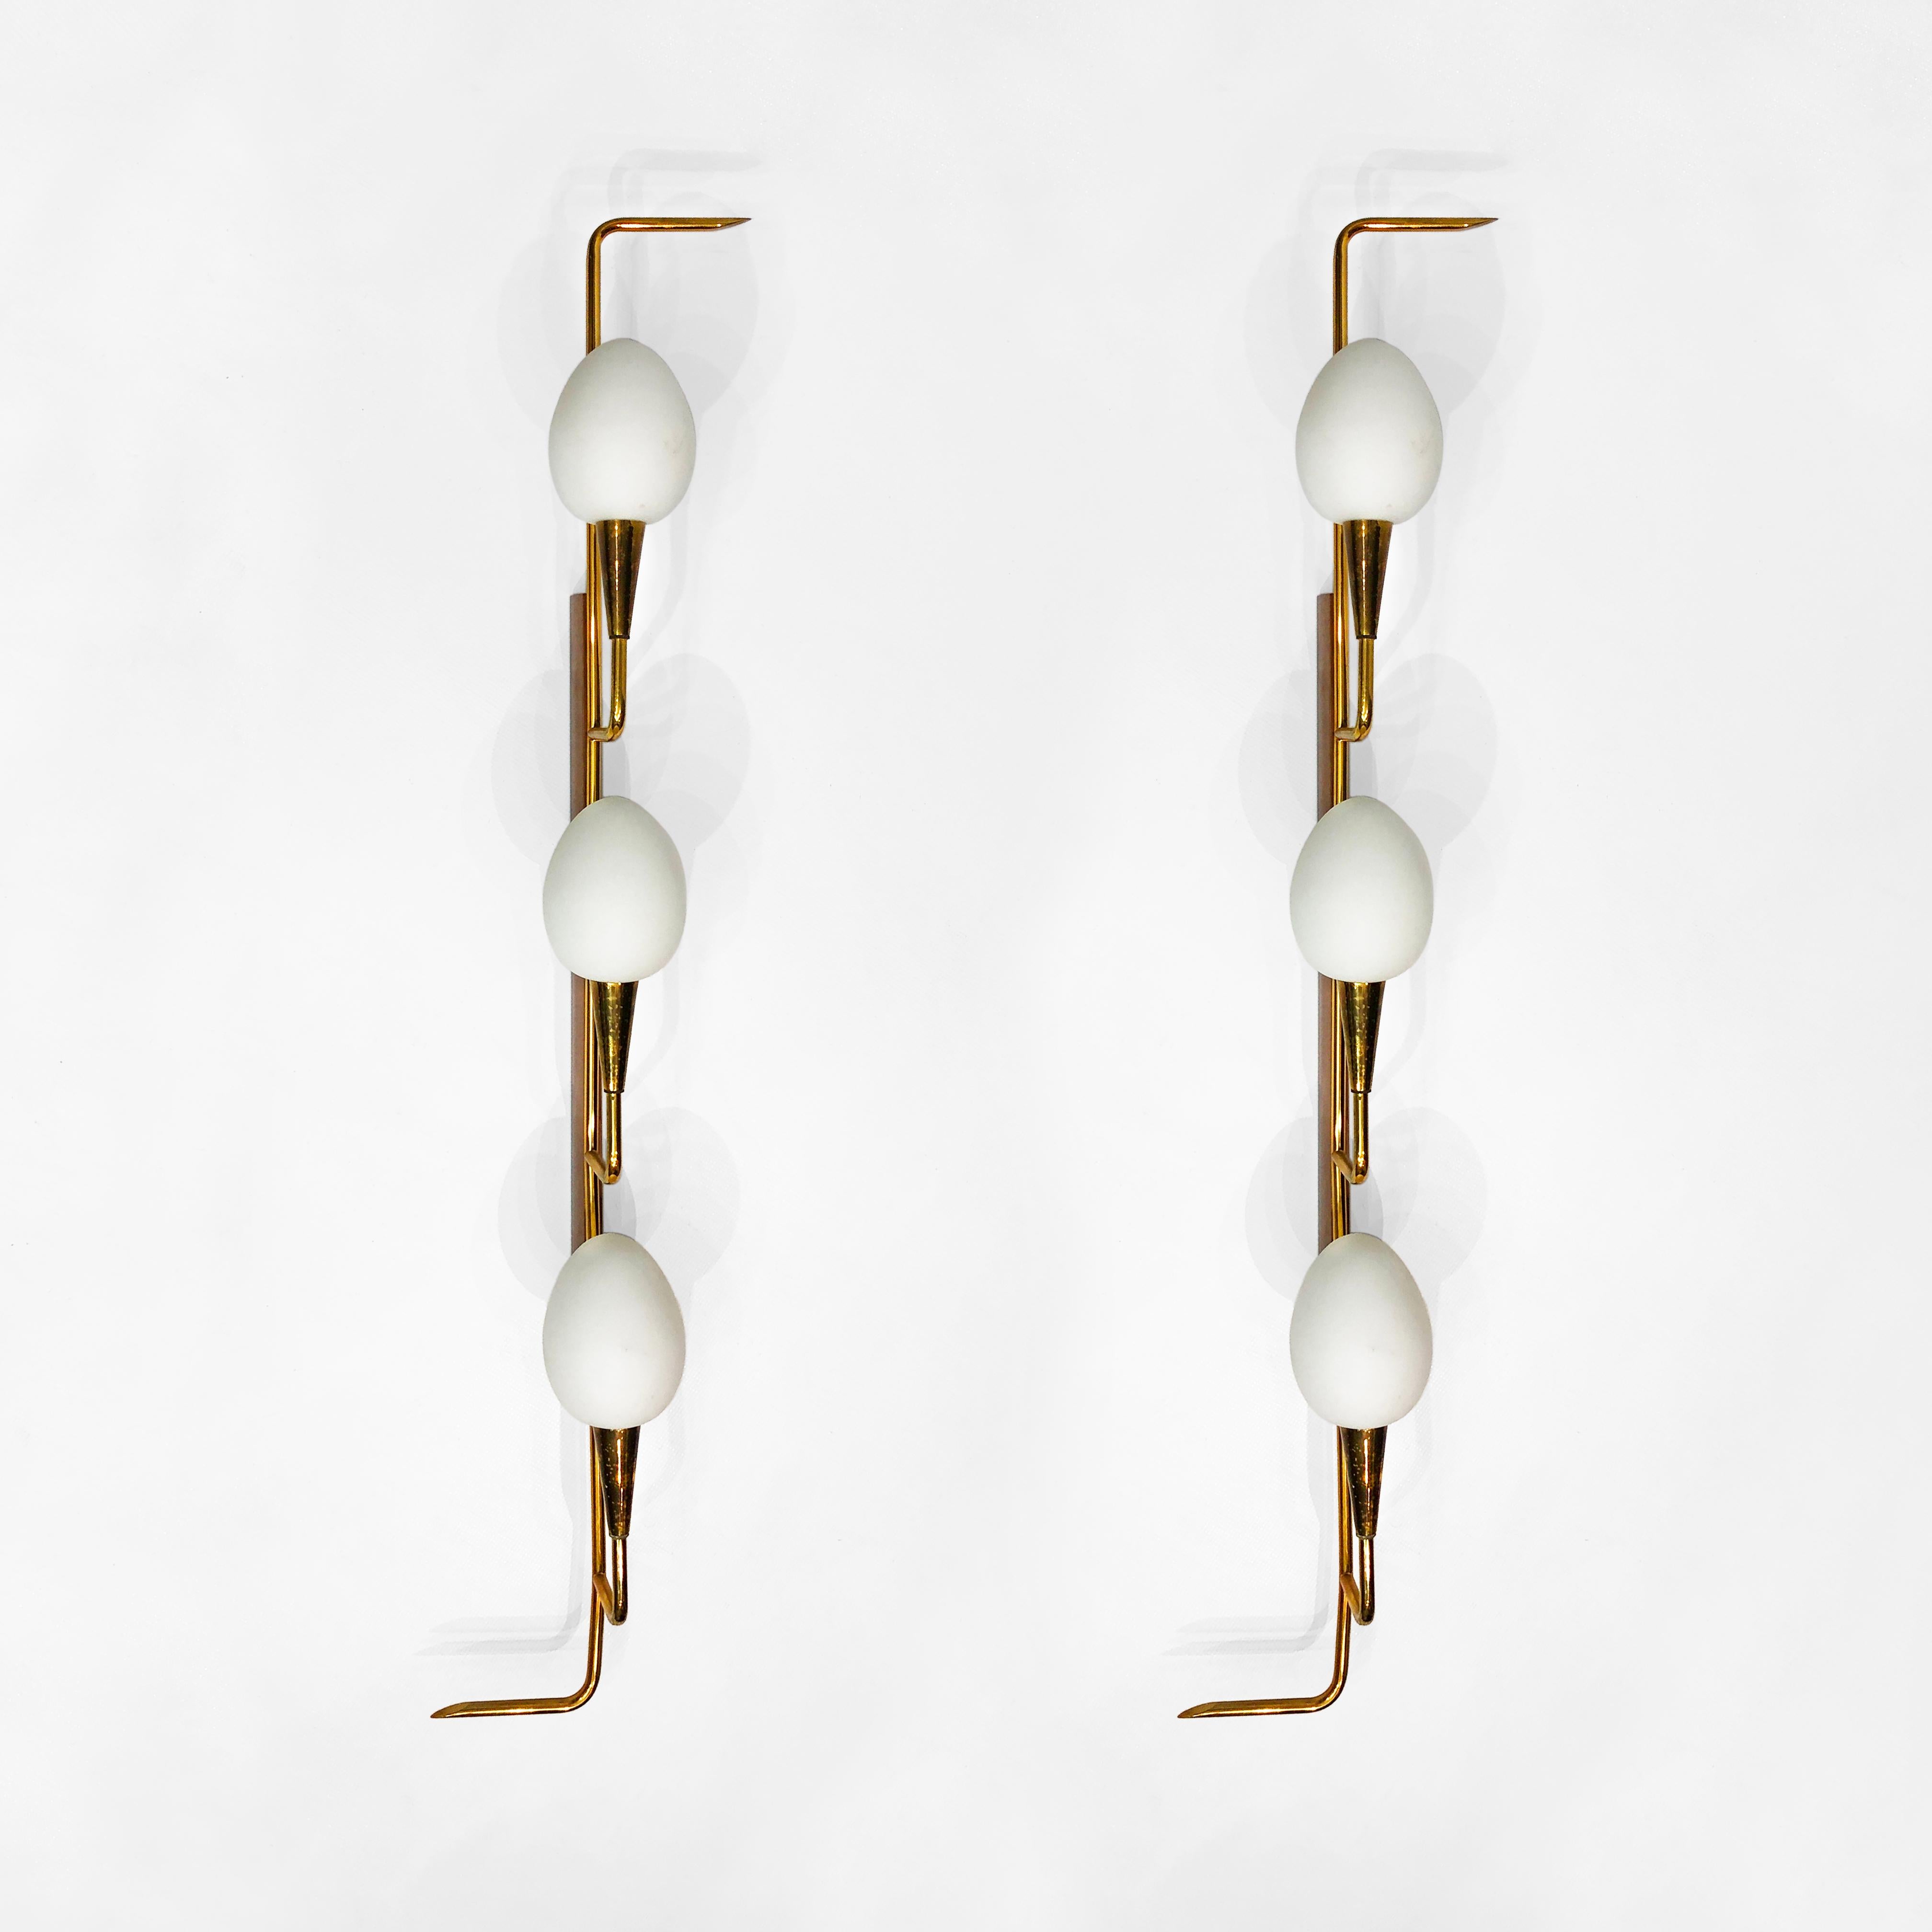 Italian Maison Lunel Pair Of Mid-Century  Teak And Brass Wall Lights 1950s For Sale